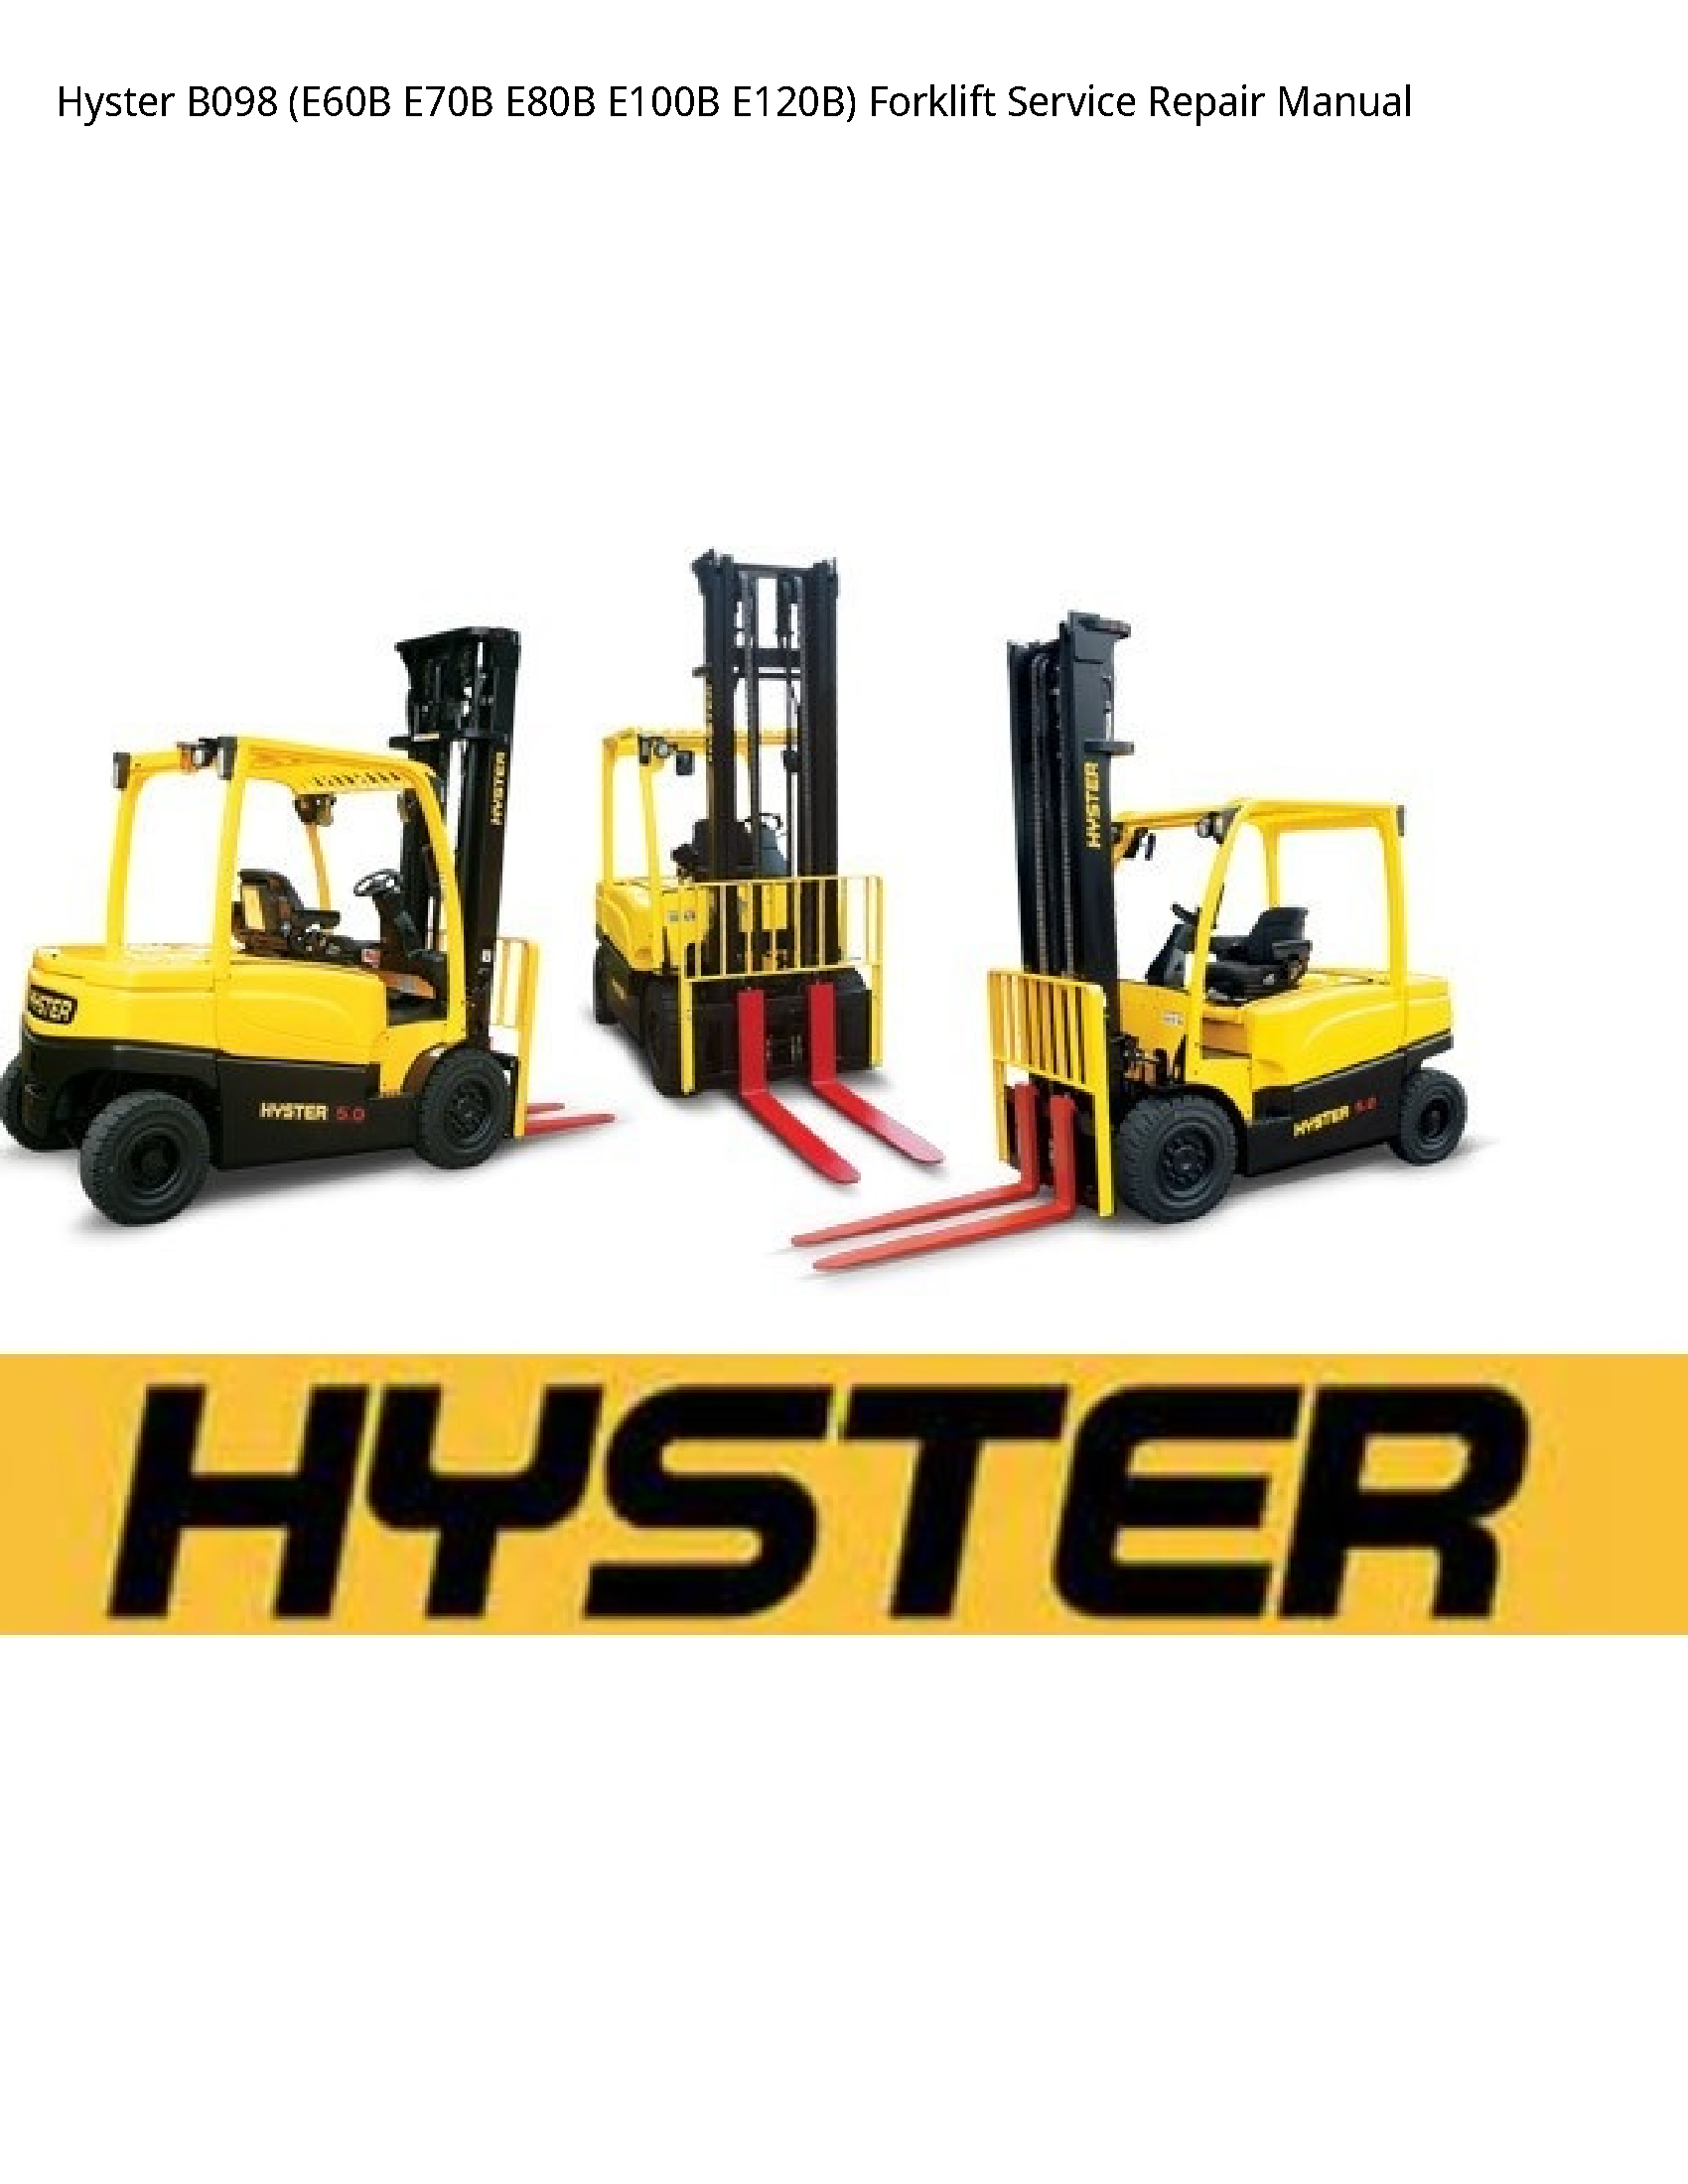 Hyster B098 Forklift manual